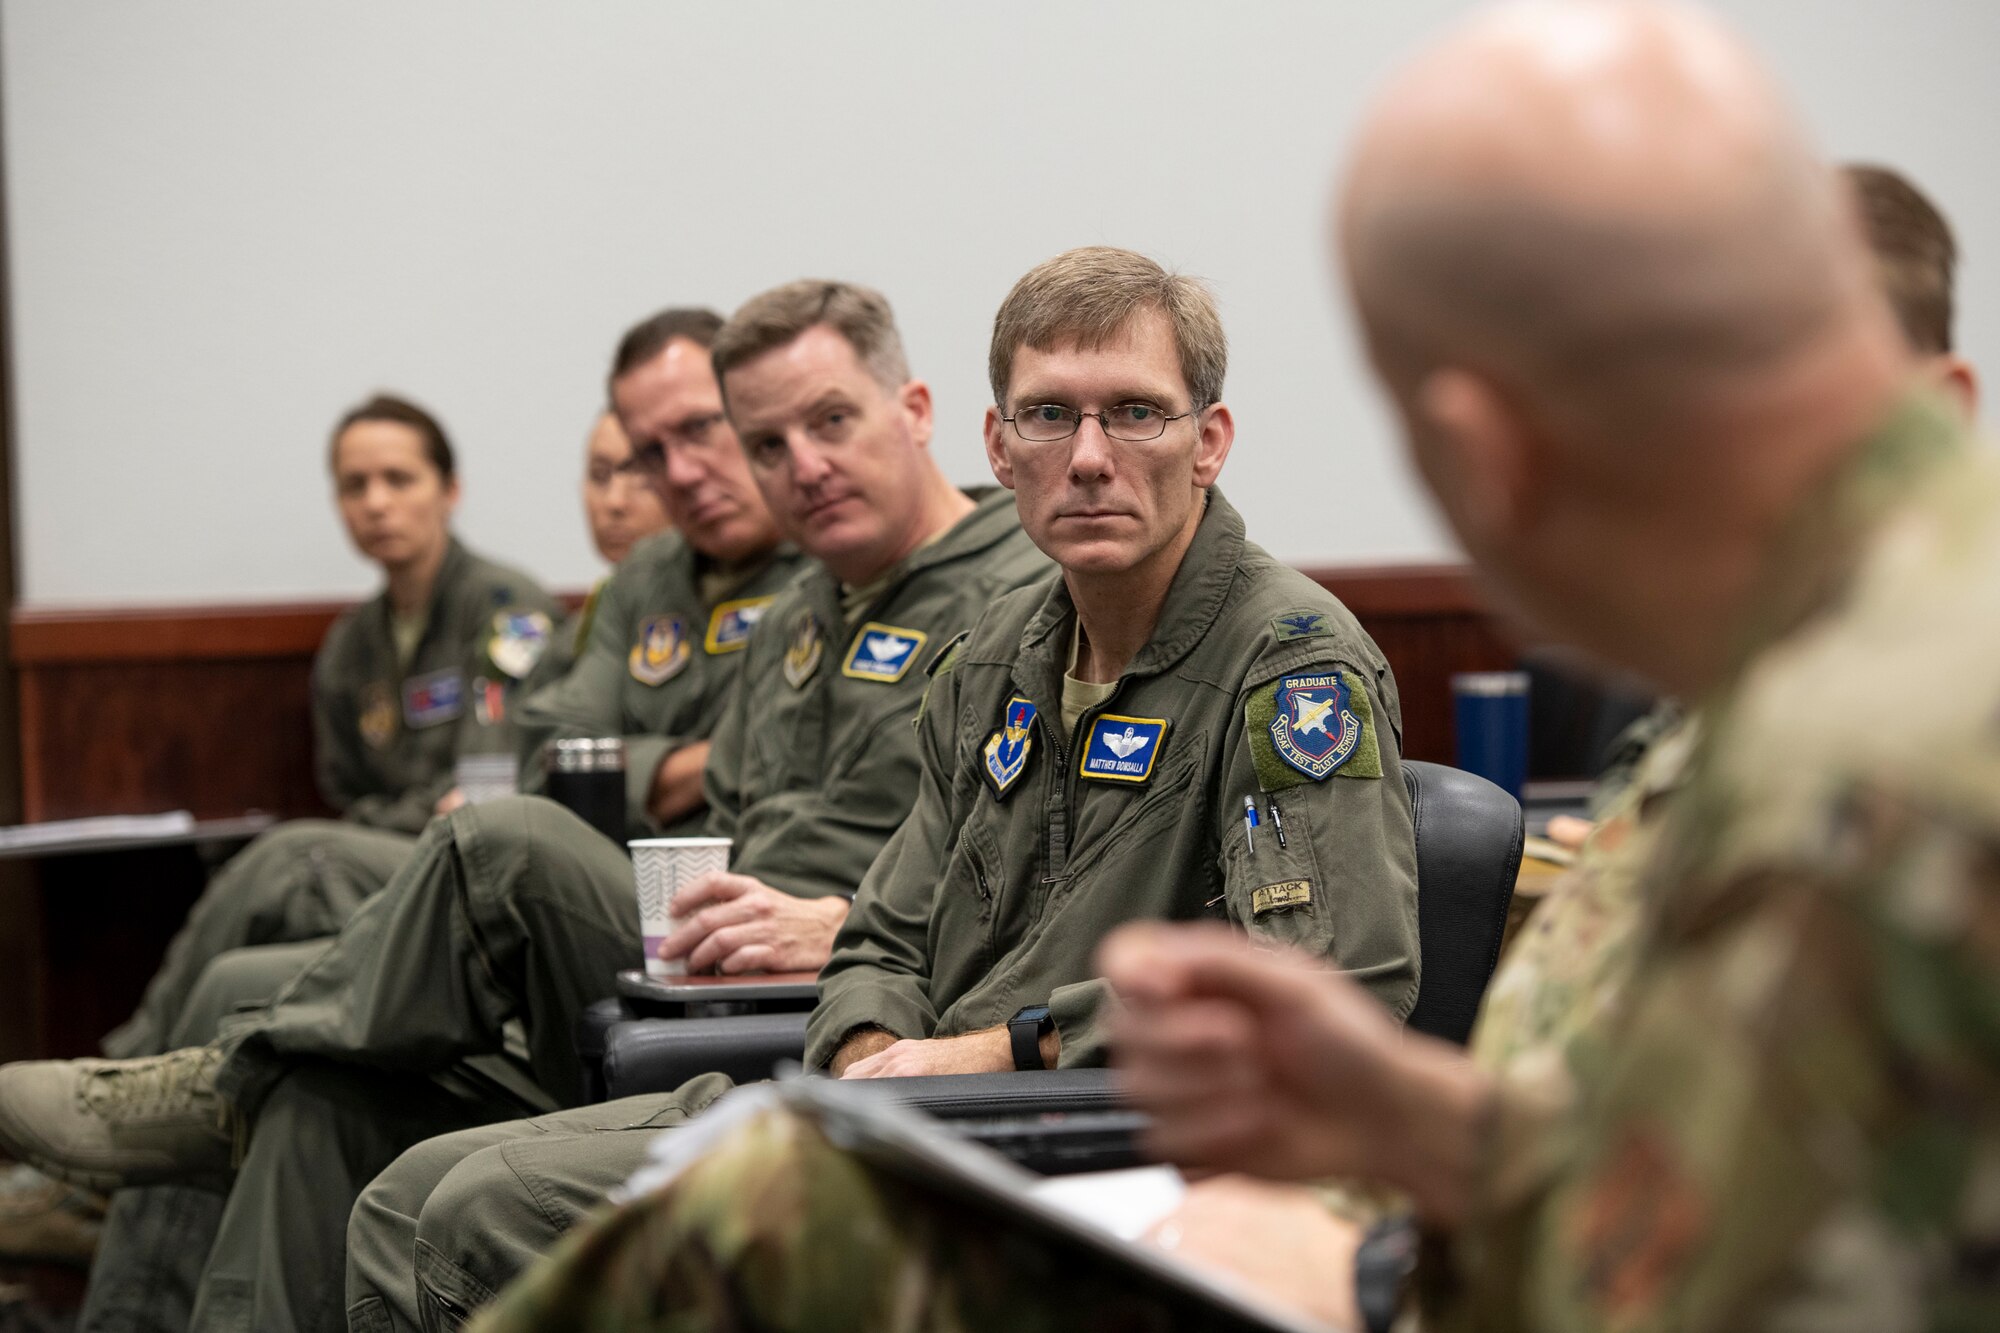 Col. Matthew Domsalla,12th Flying Training Wing vice commander, listens during a Total Force Integration briefing Feb. 4 at Joint Base San Antonio-Randolph, Texas. TFI works to improve integration between active-duty Air Force, Air Force Reserve, and the Air National Guard.(U.S. Air Force photo by Sabrina Fine)